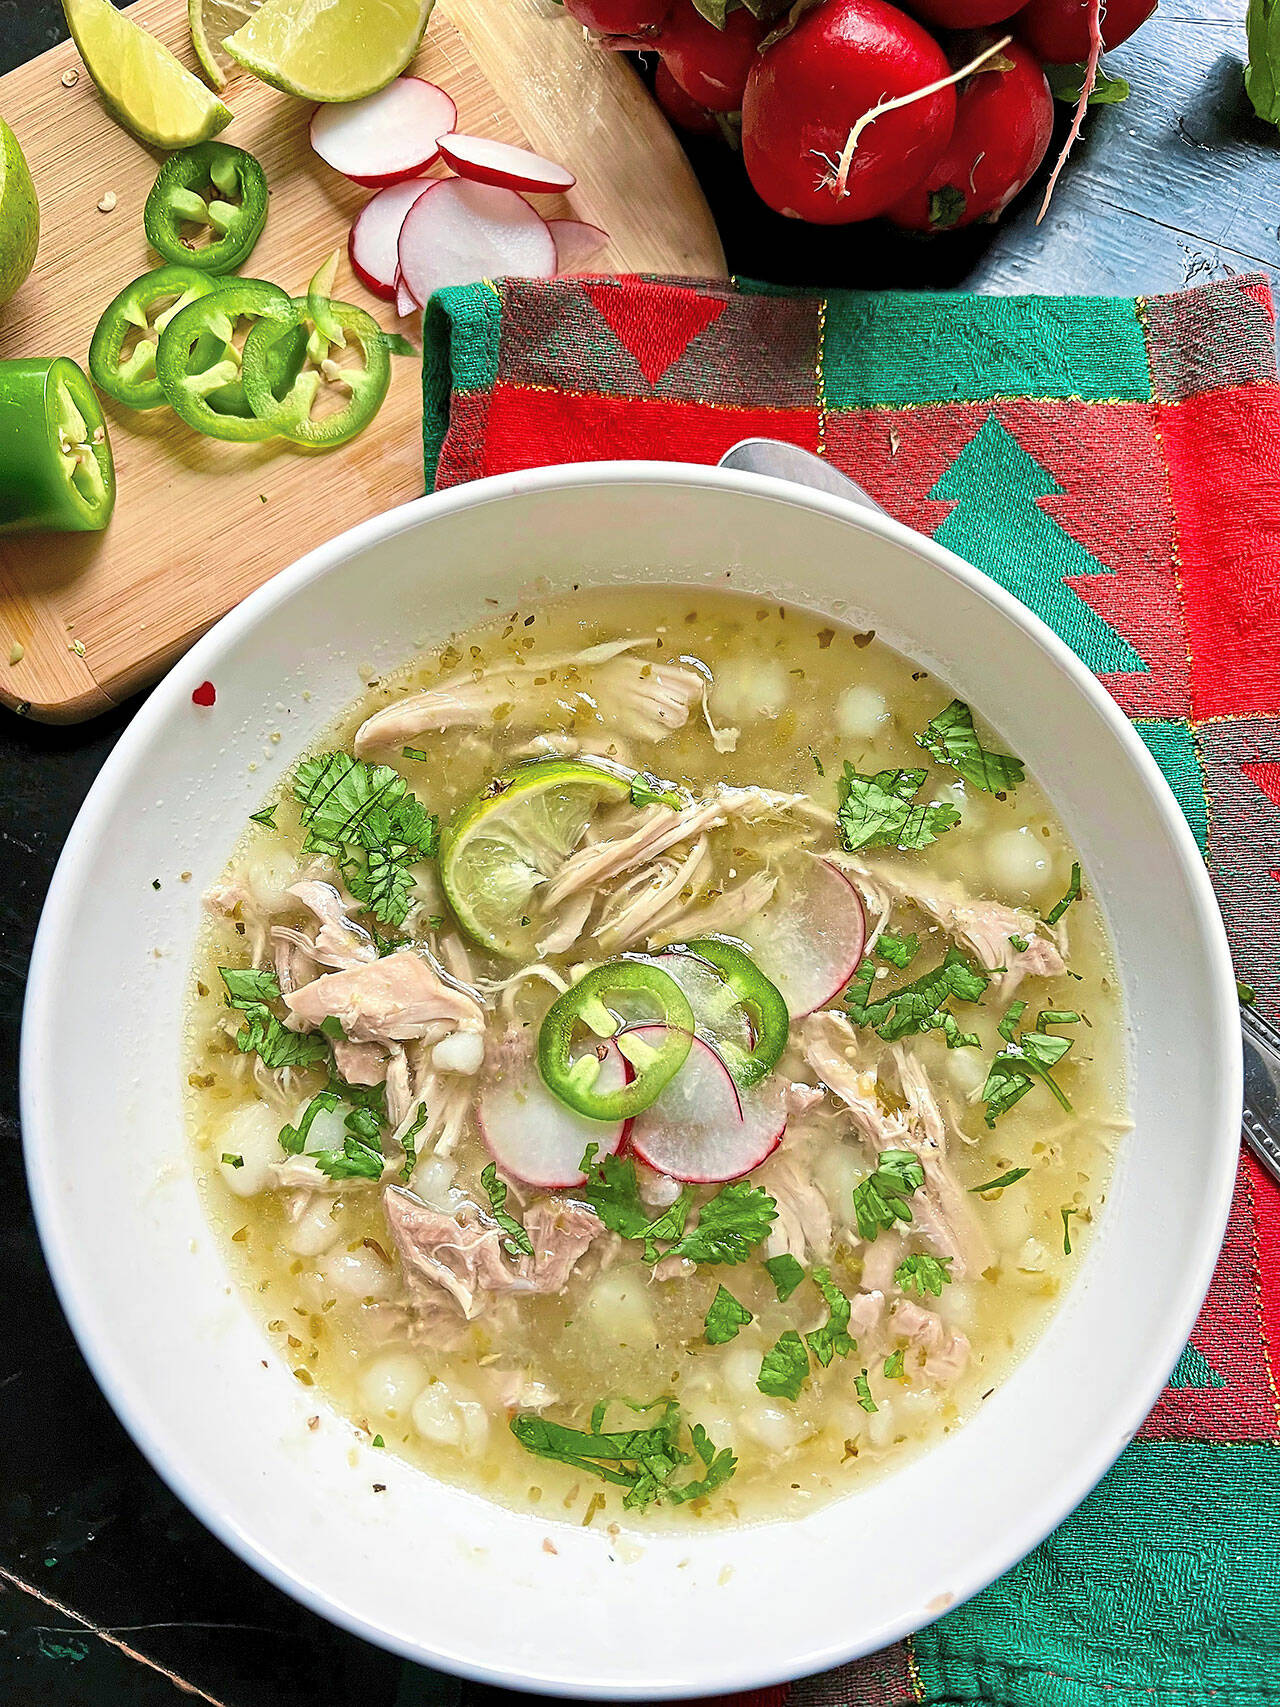 Hot and nourishing, this easy chicken pozole is made with jarred salsa verde. (Gretchen McKay / Pittsburgh Post-Gazette)